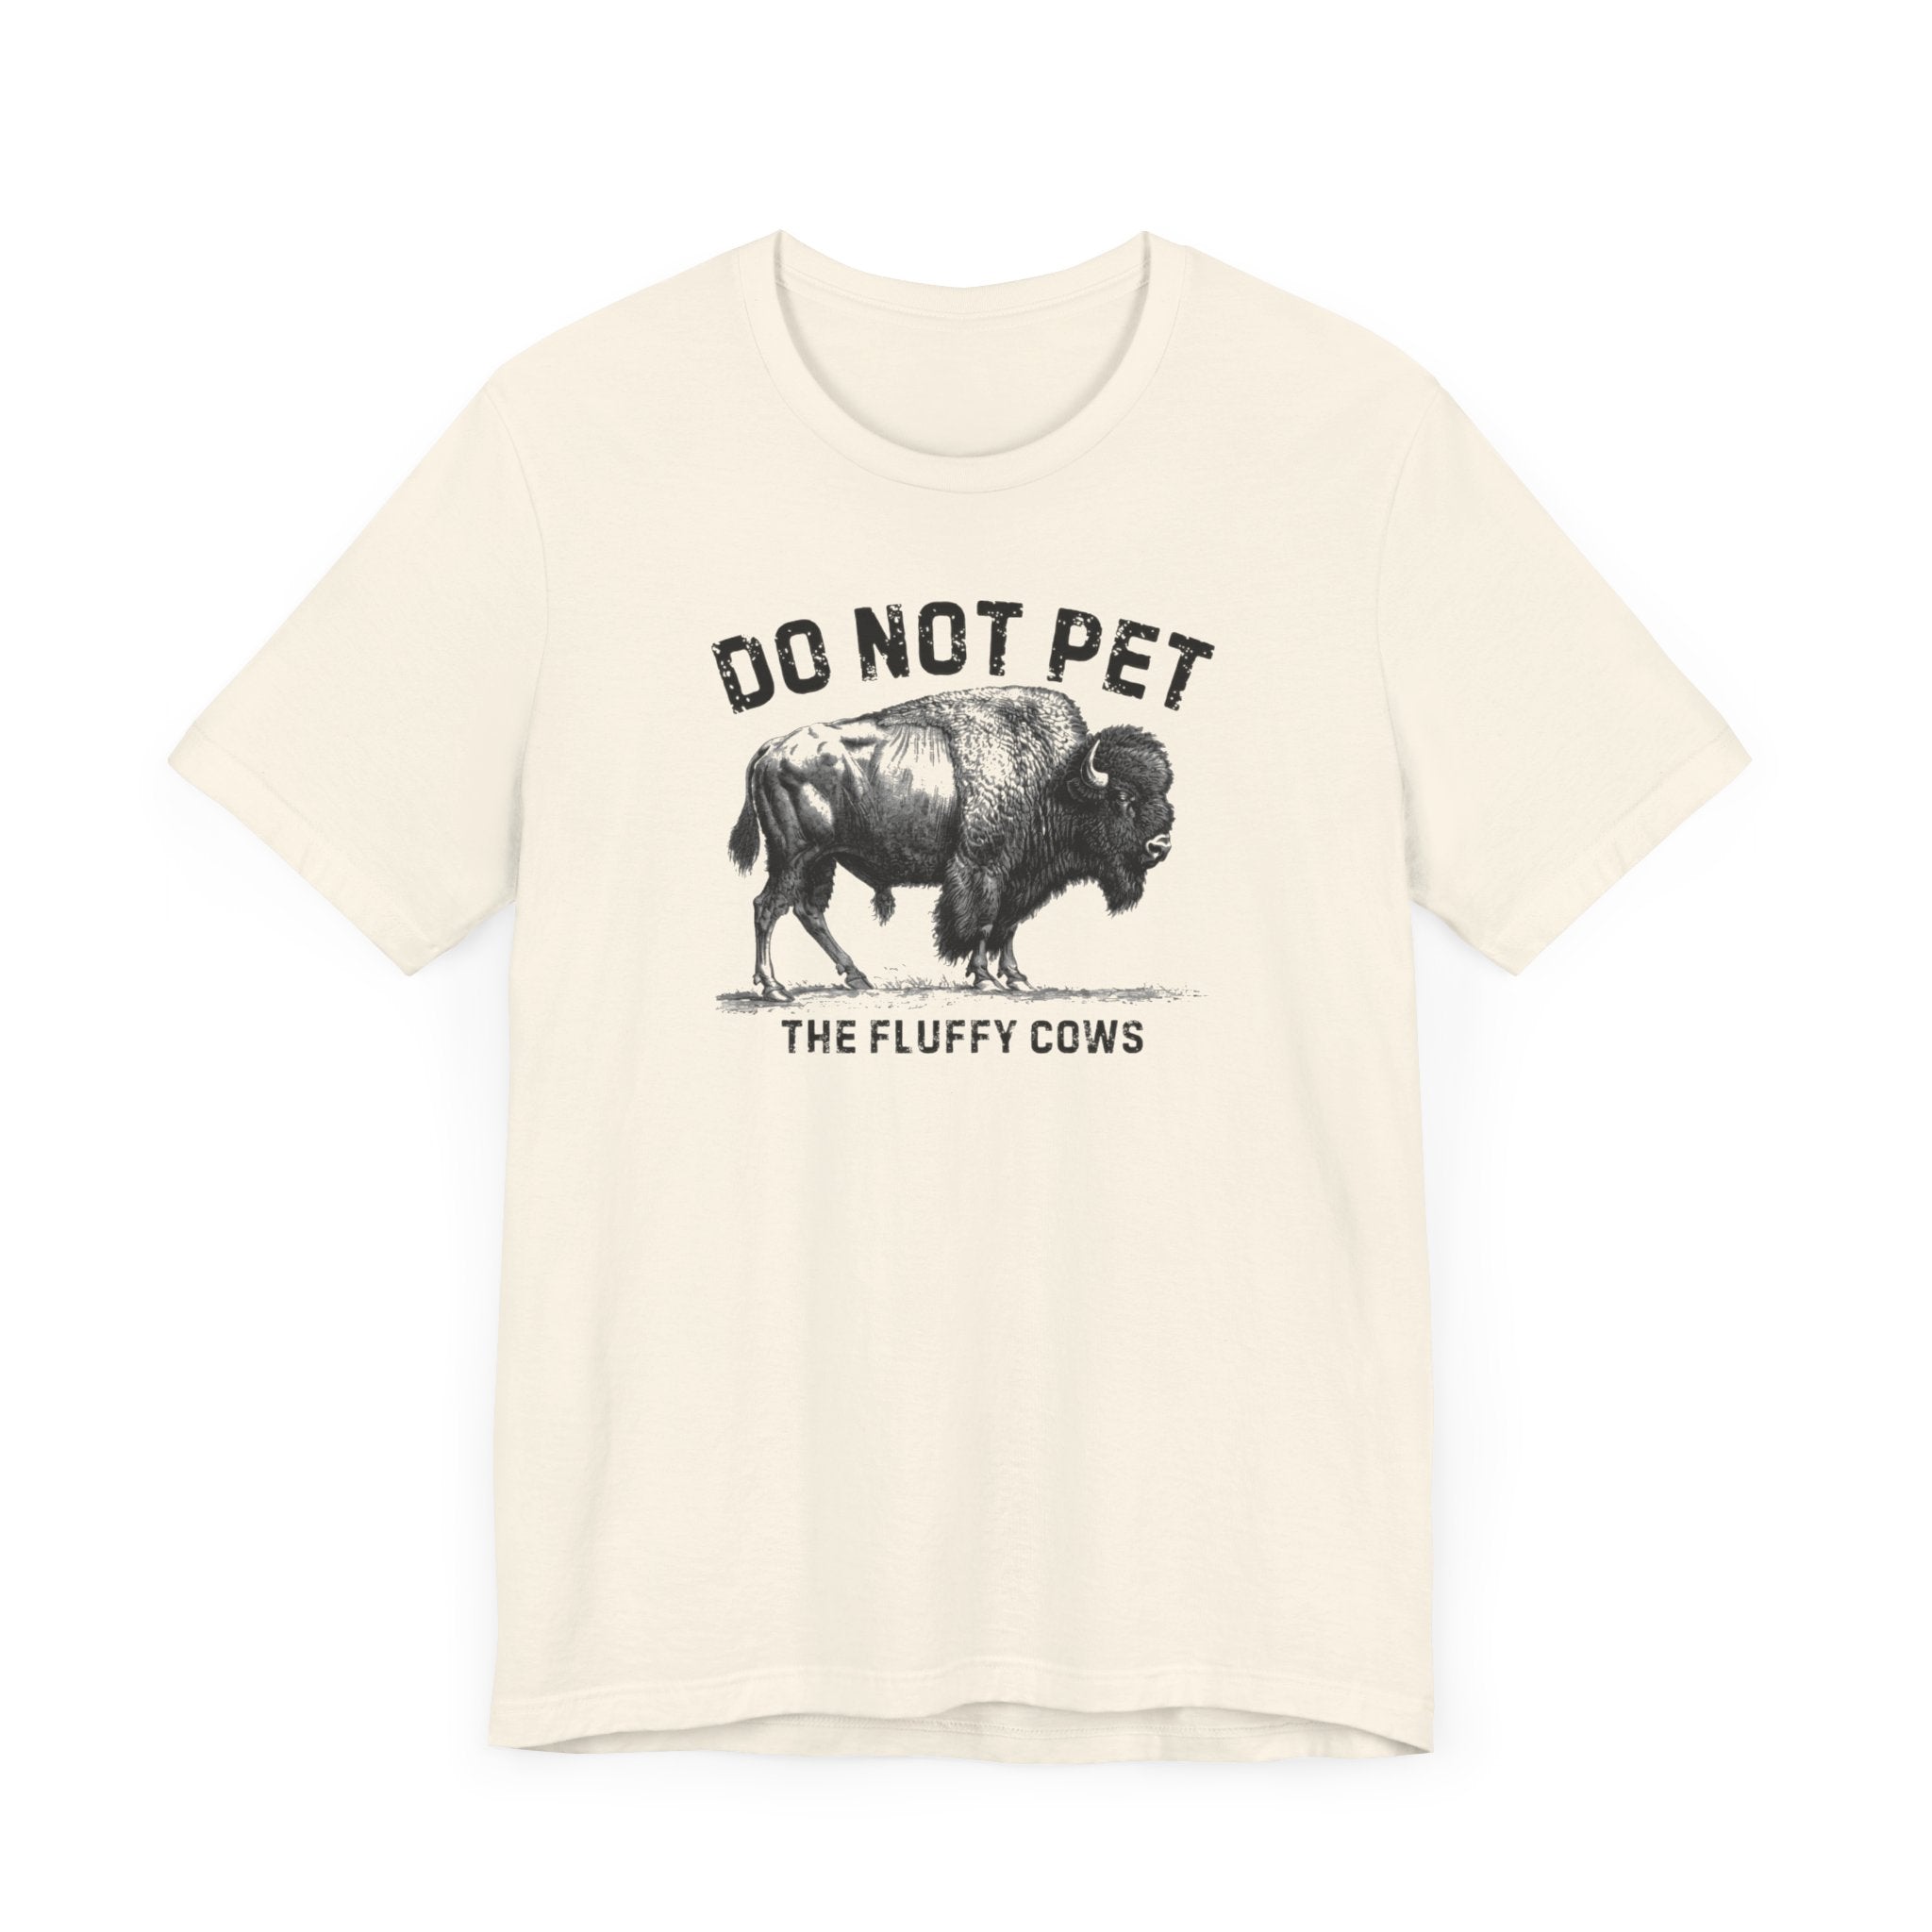 Do Not Pet The Fluffy Cows Shirt Funny Animal Lover Tee